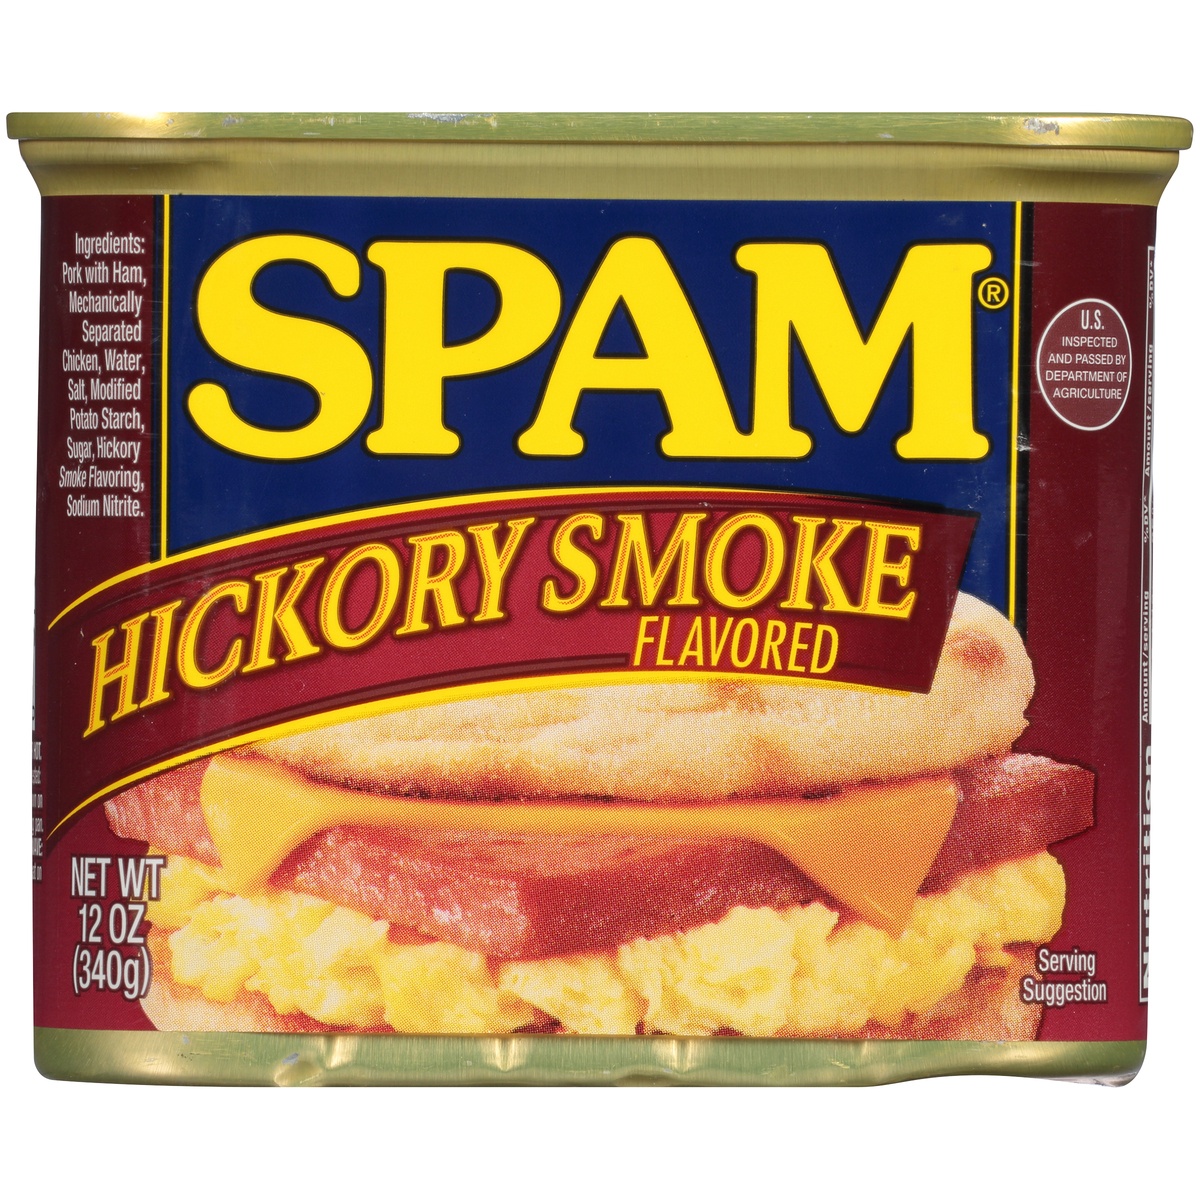 slide 9 of 11, SPAM Hickory Smoke Flavored Canned Meat 12 oz. Pull-Top Can, 12 oz